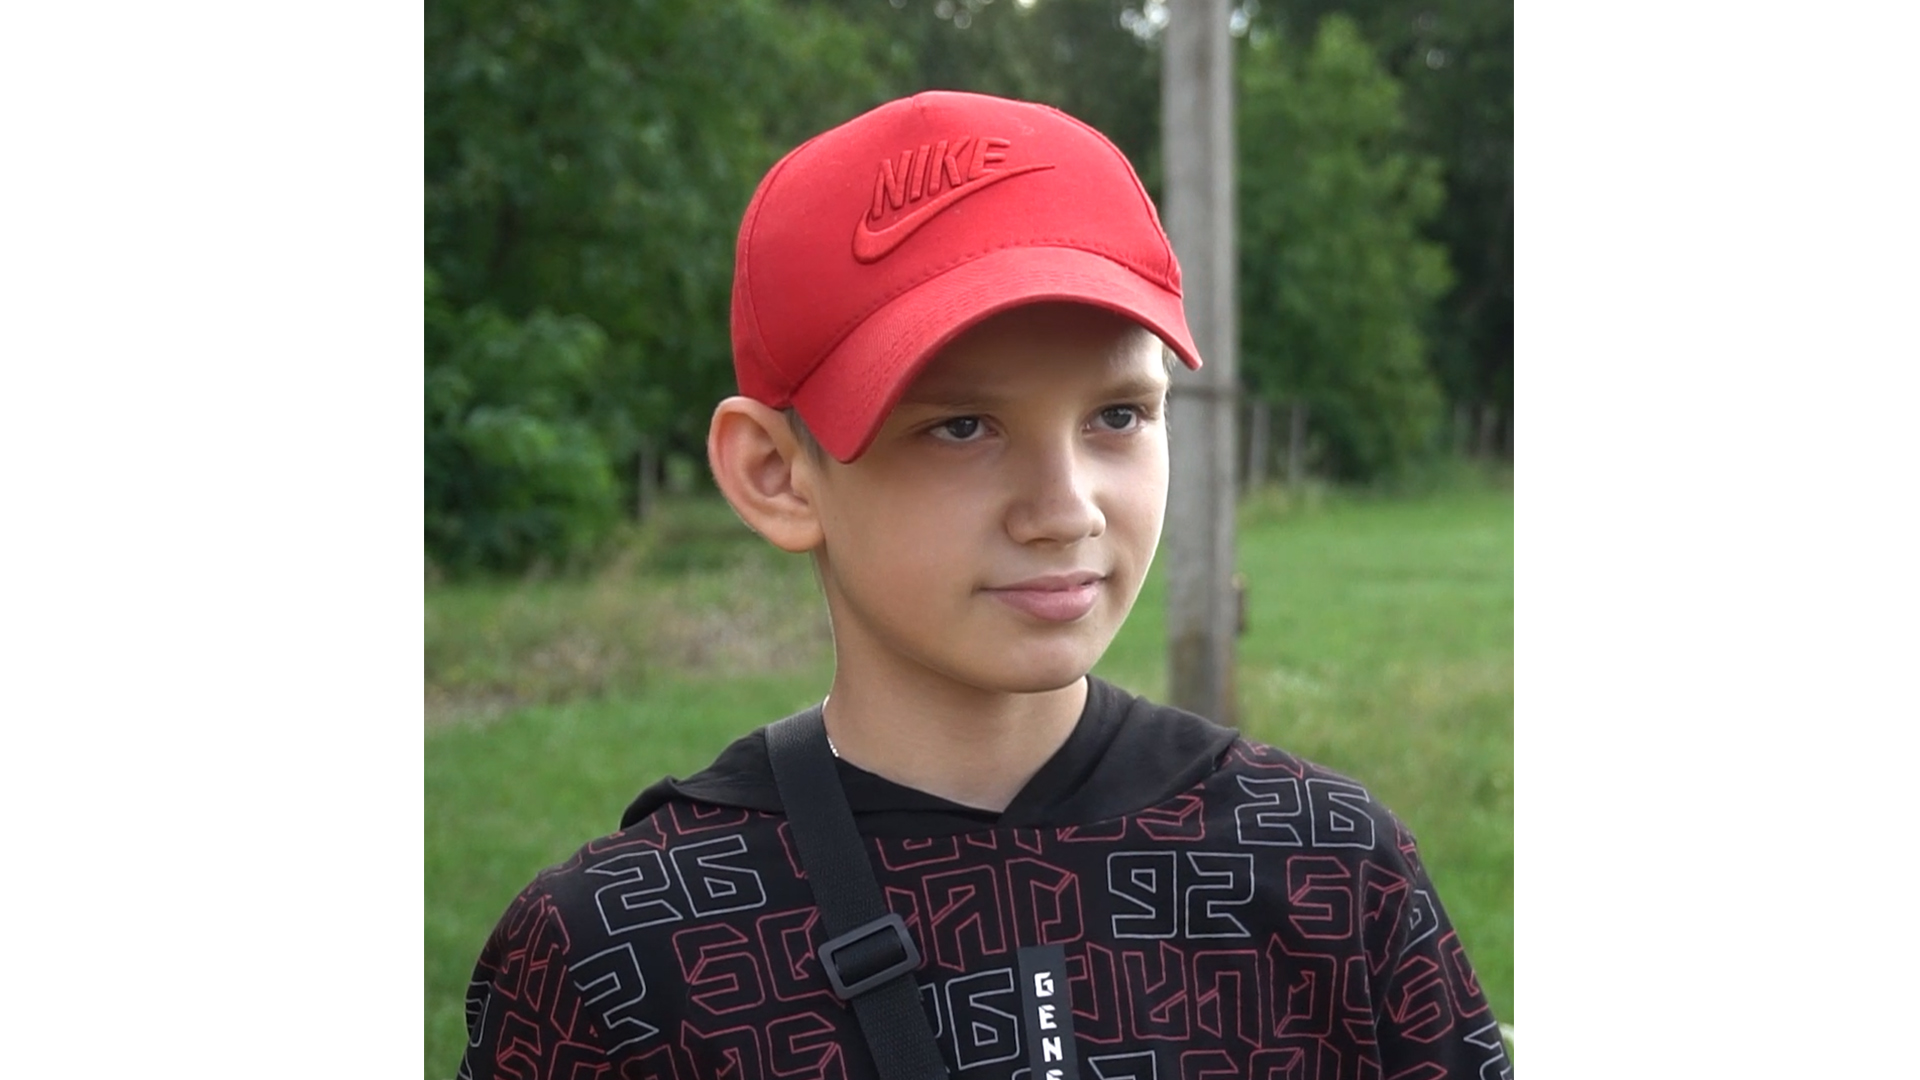 A boy in a patterned sweater and a red baseball cap stands outside in a field and looks just past the camera with a calm expression